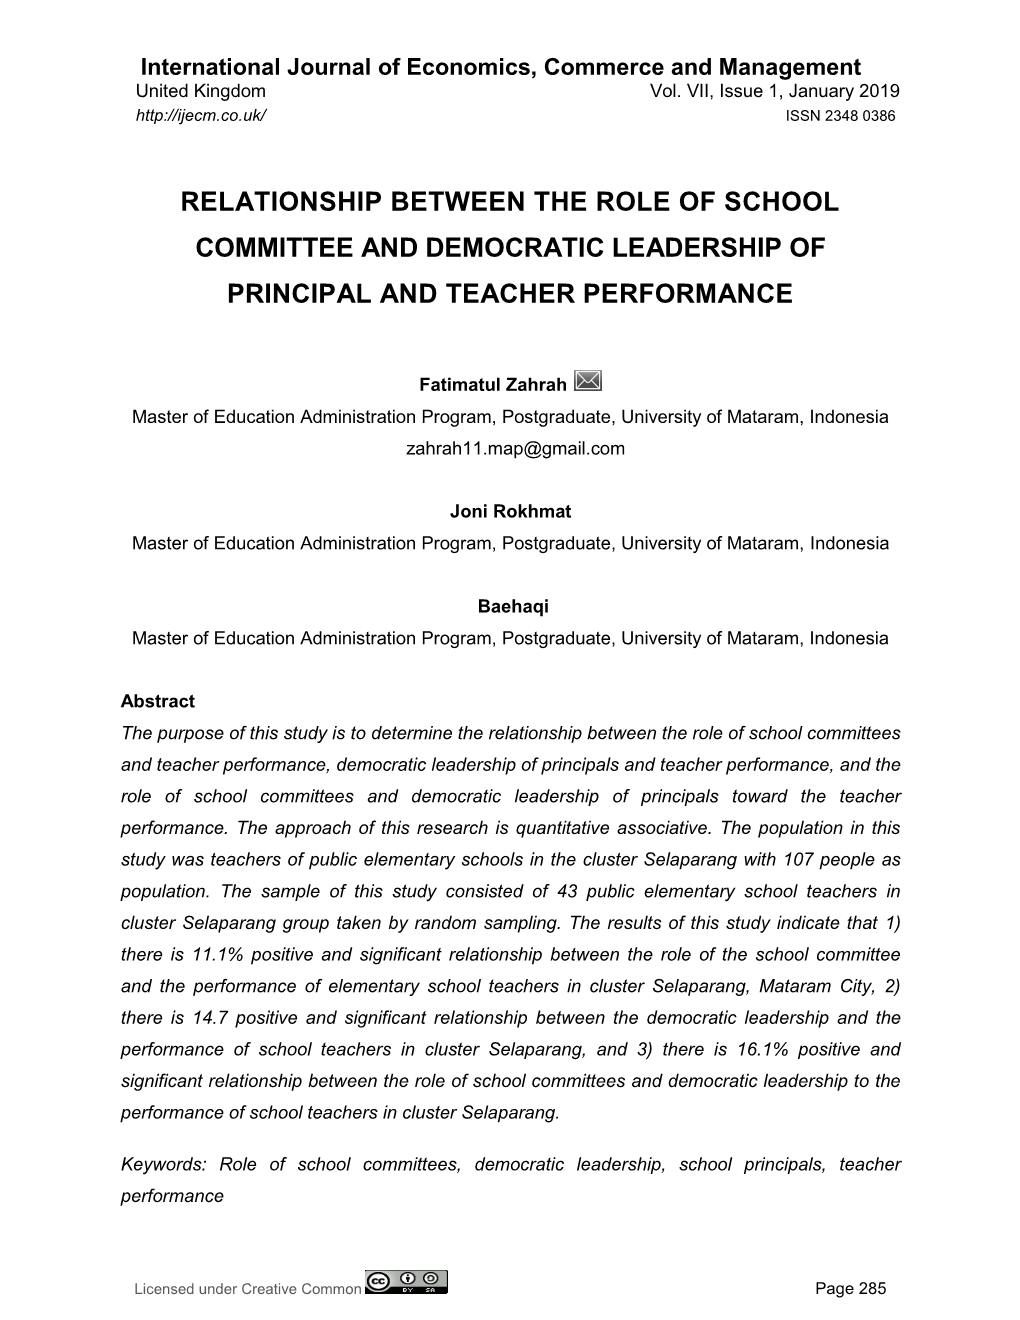 Relationship Between the Role of School Committee and Democratic Leadership of Principal and Teacher Performance